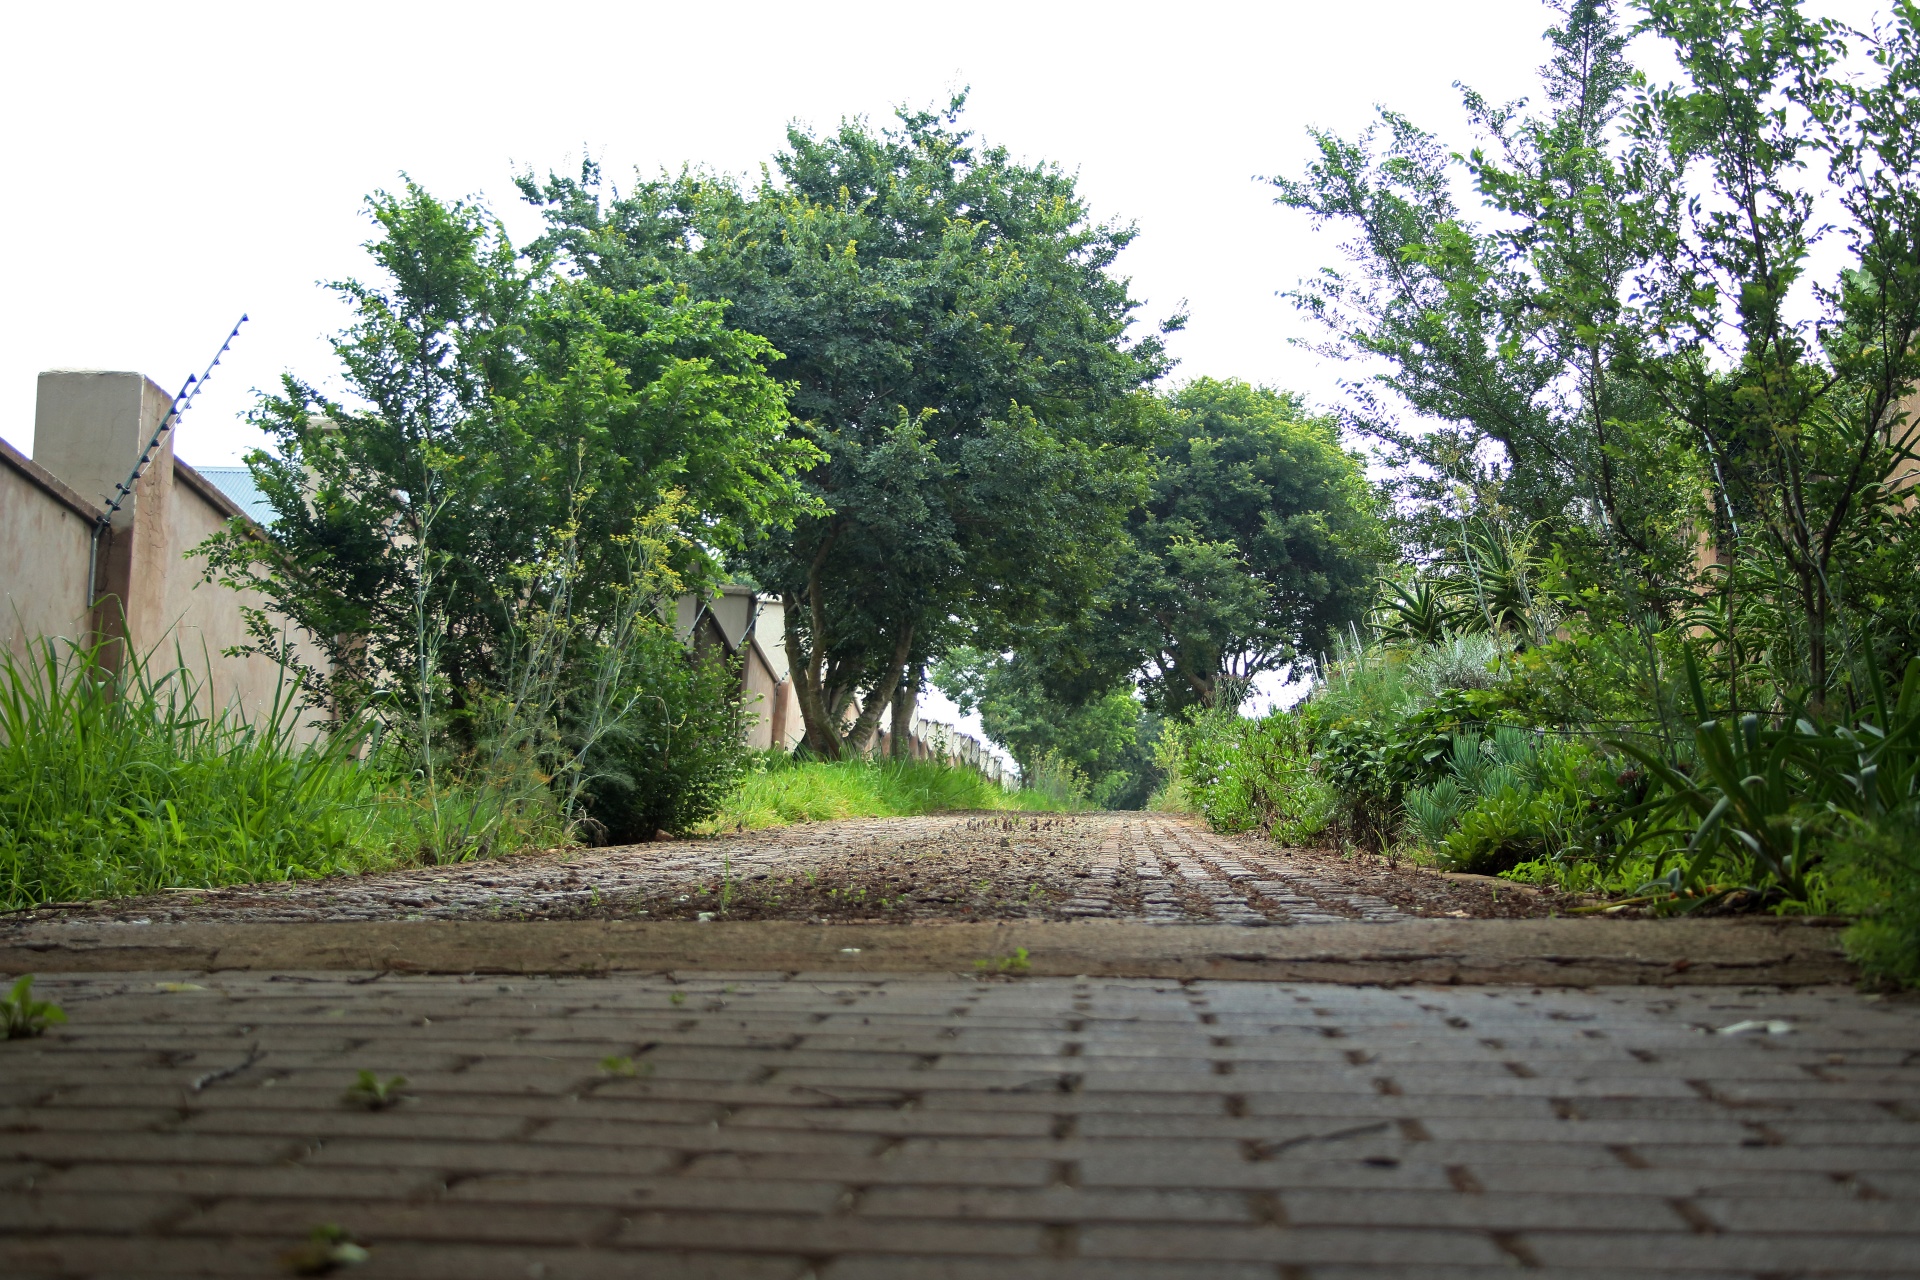 View Of Uphill Cobbled Road